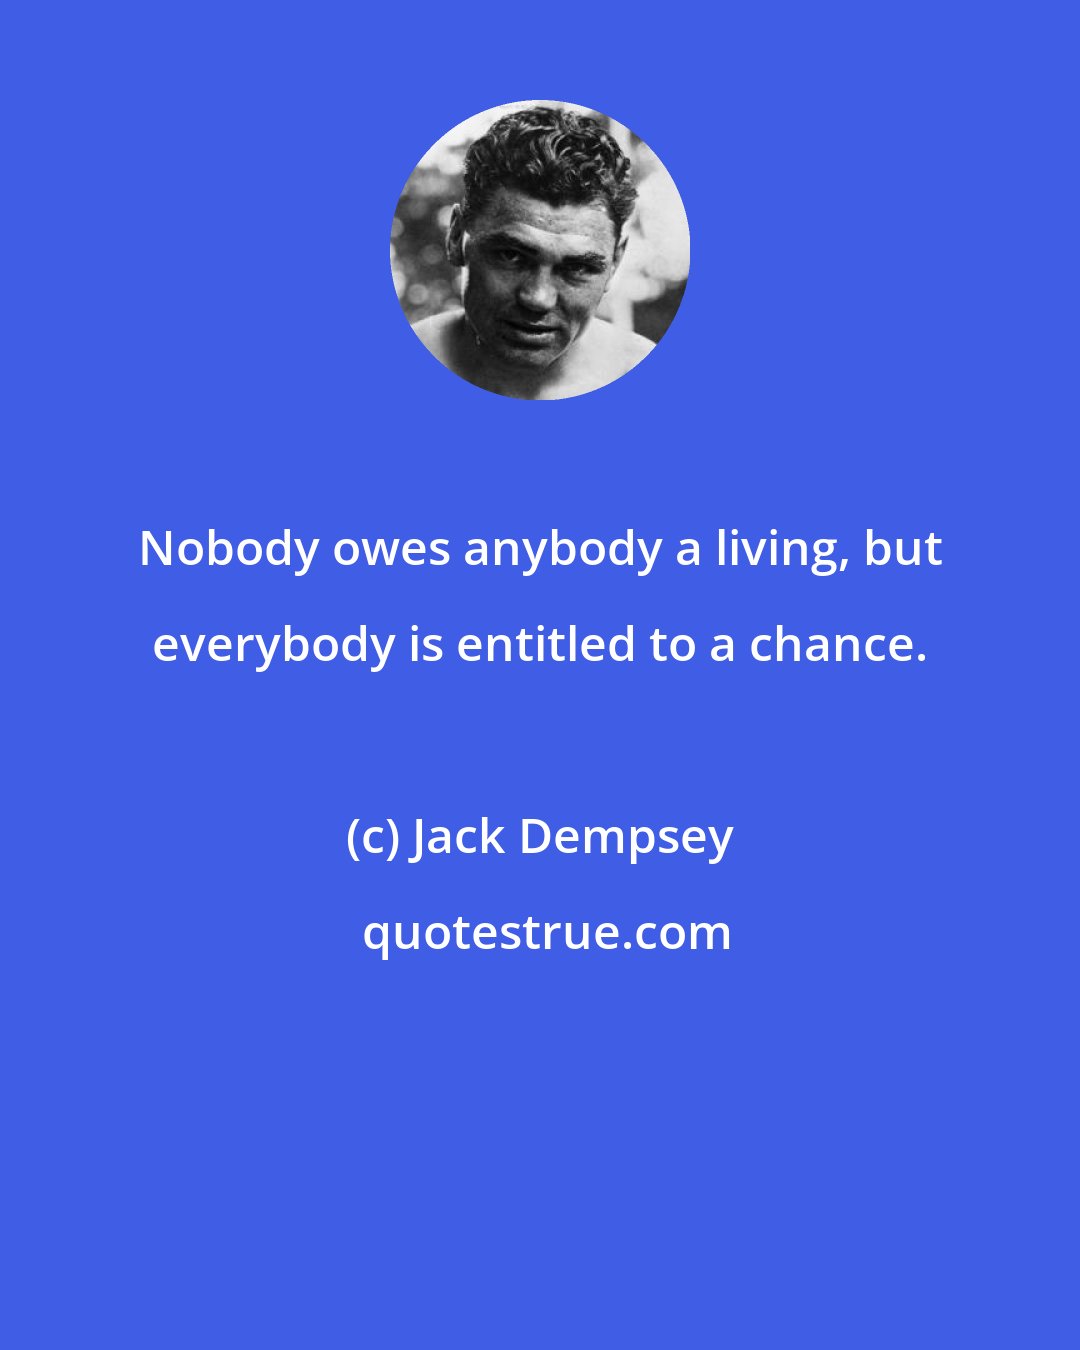 Jack Dempsey: Nobody owes anybody a living, but everybody is entitled to a chance.